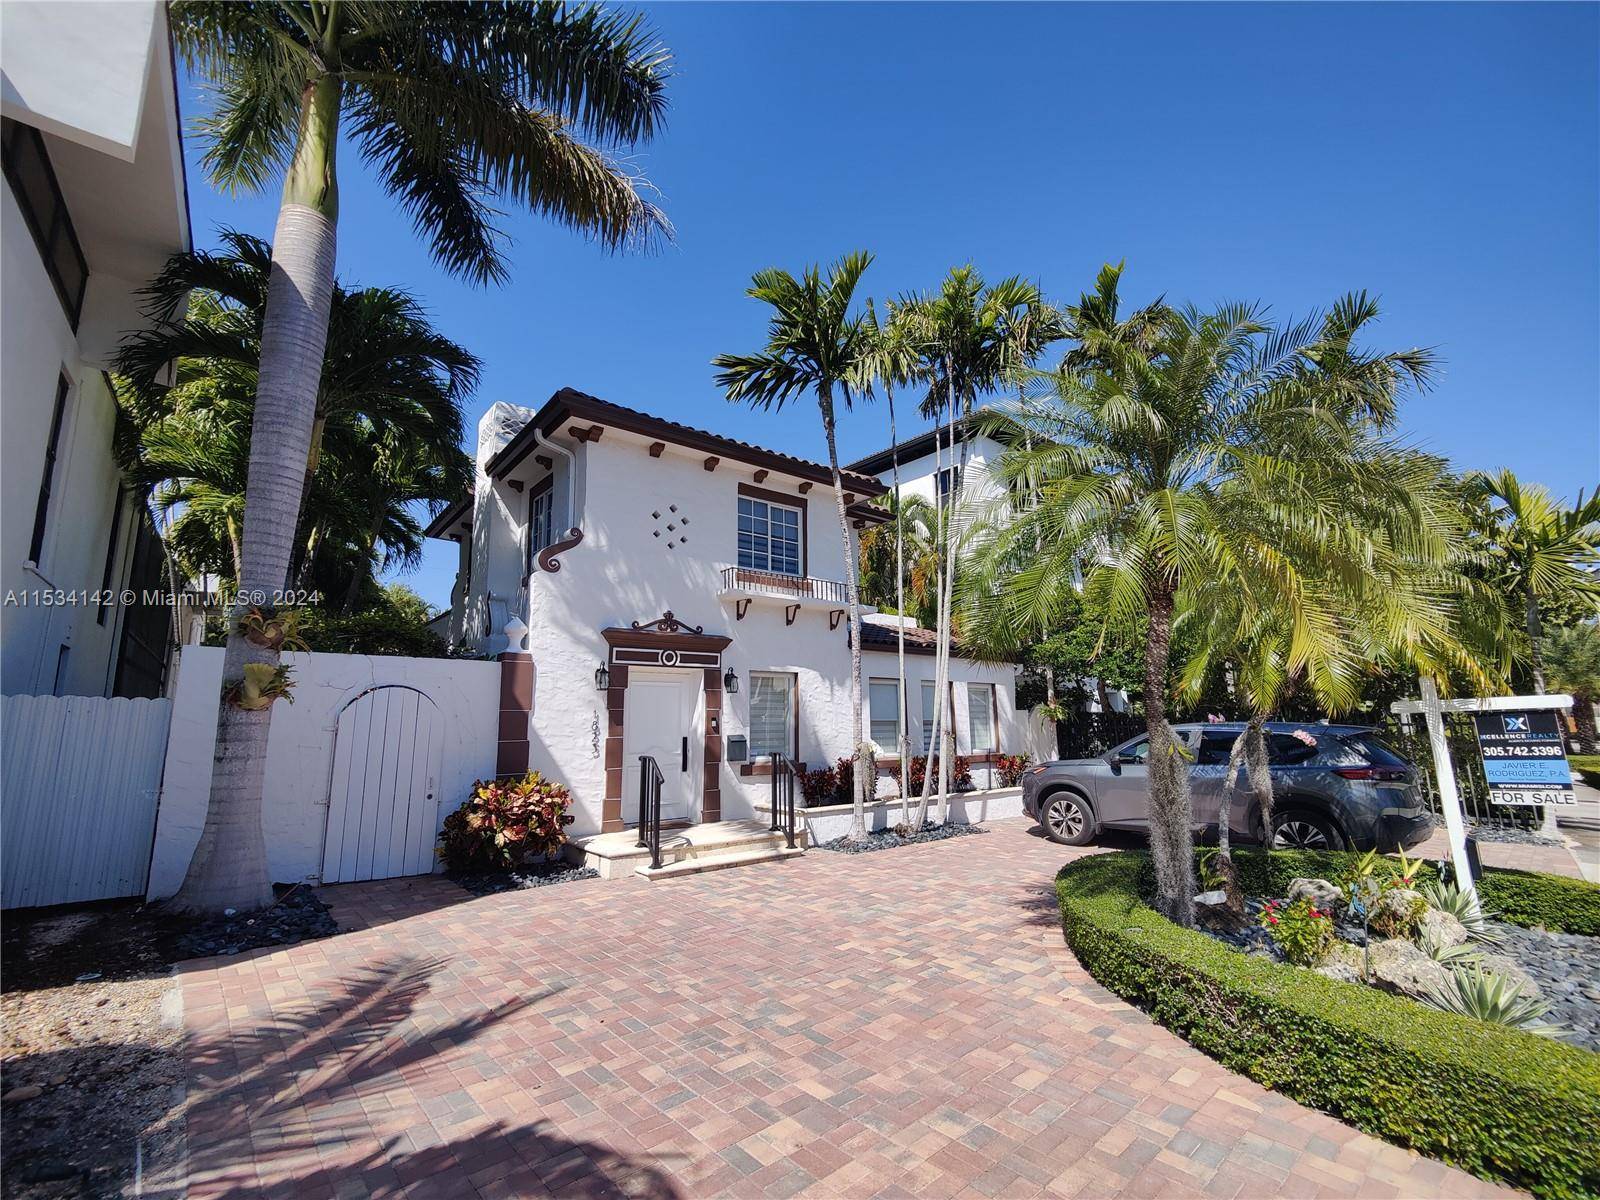 Charming Home in the North Coconut Grove area, minutes away from Brickell.